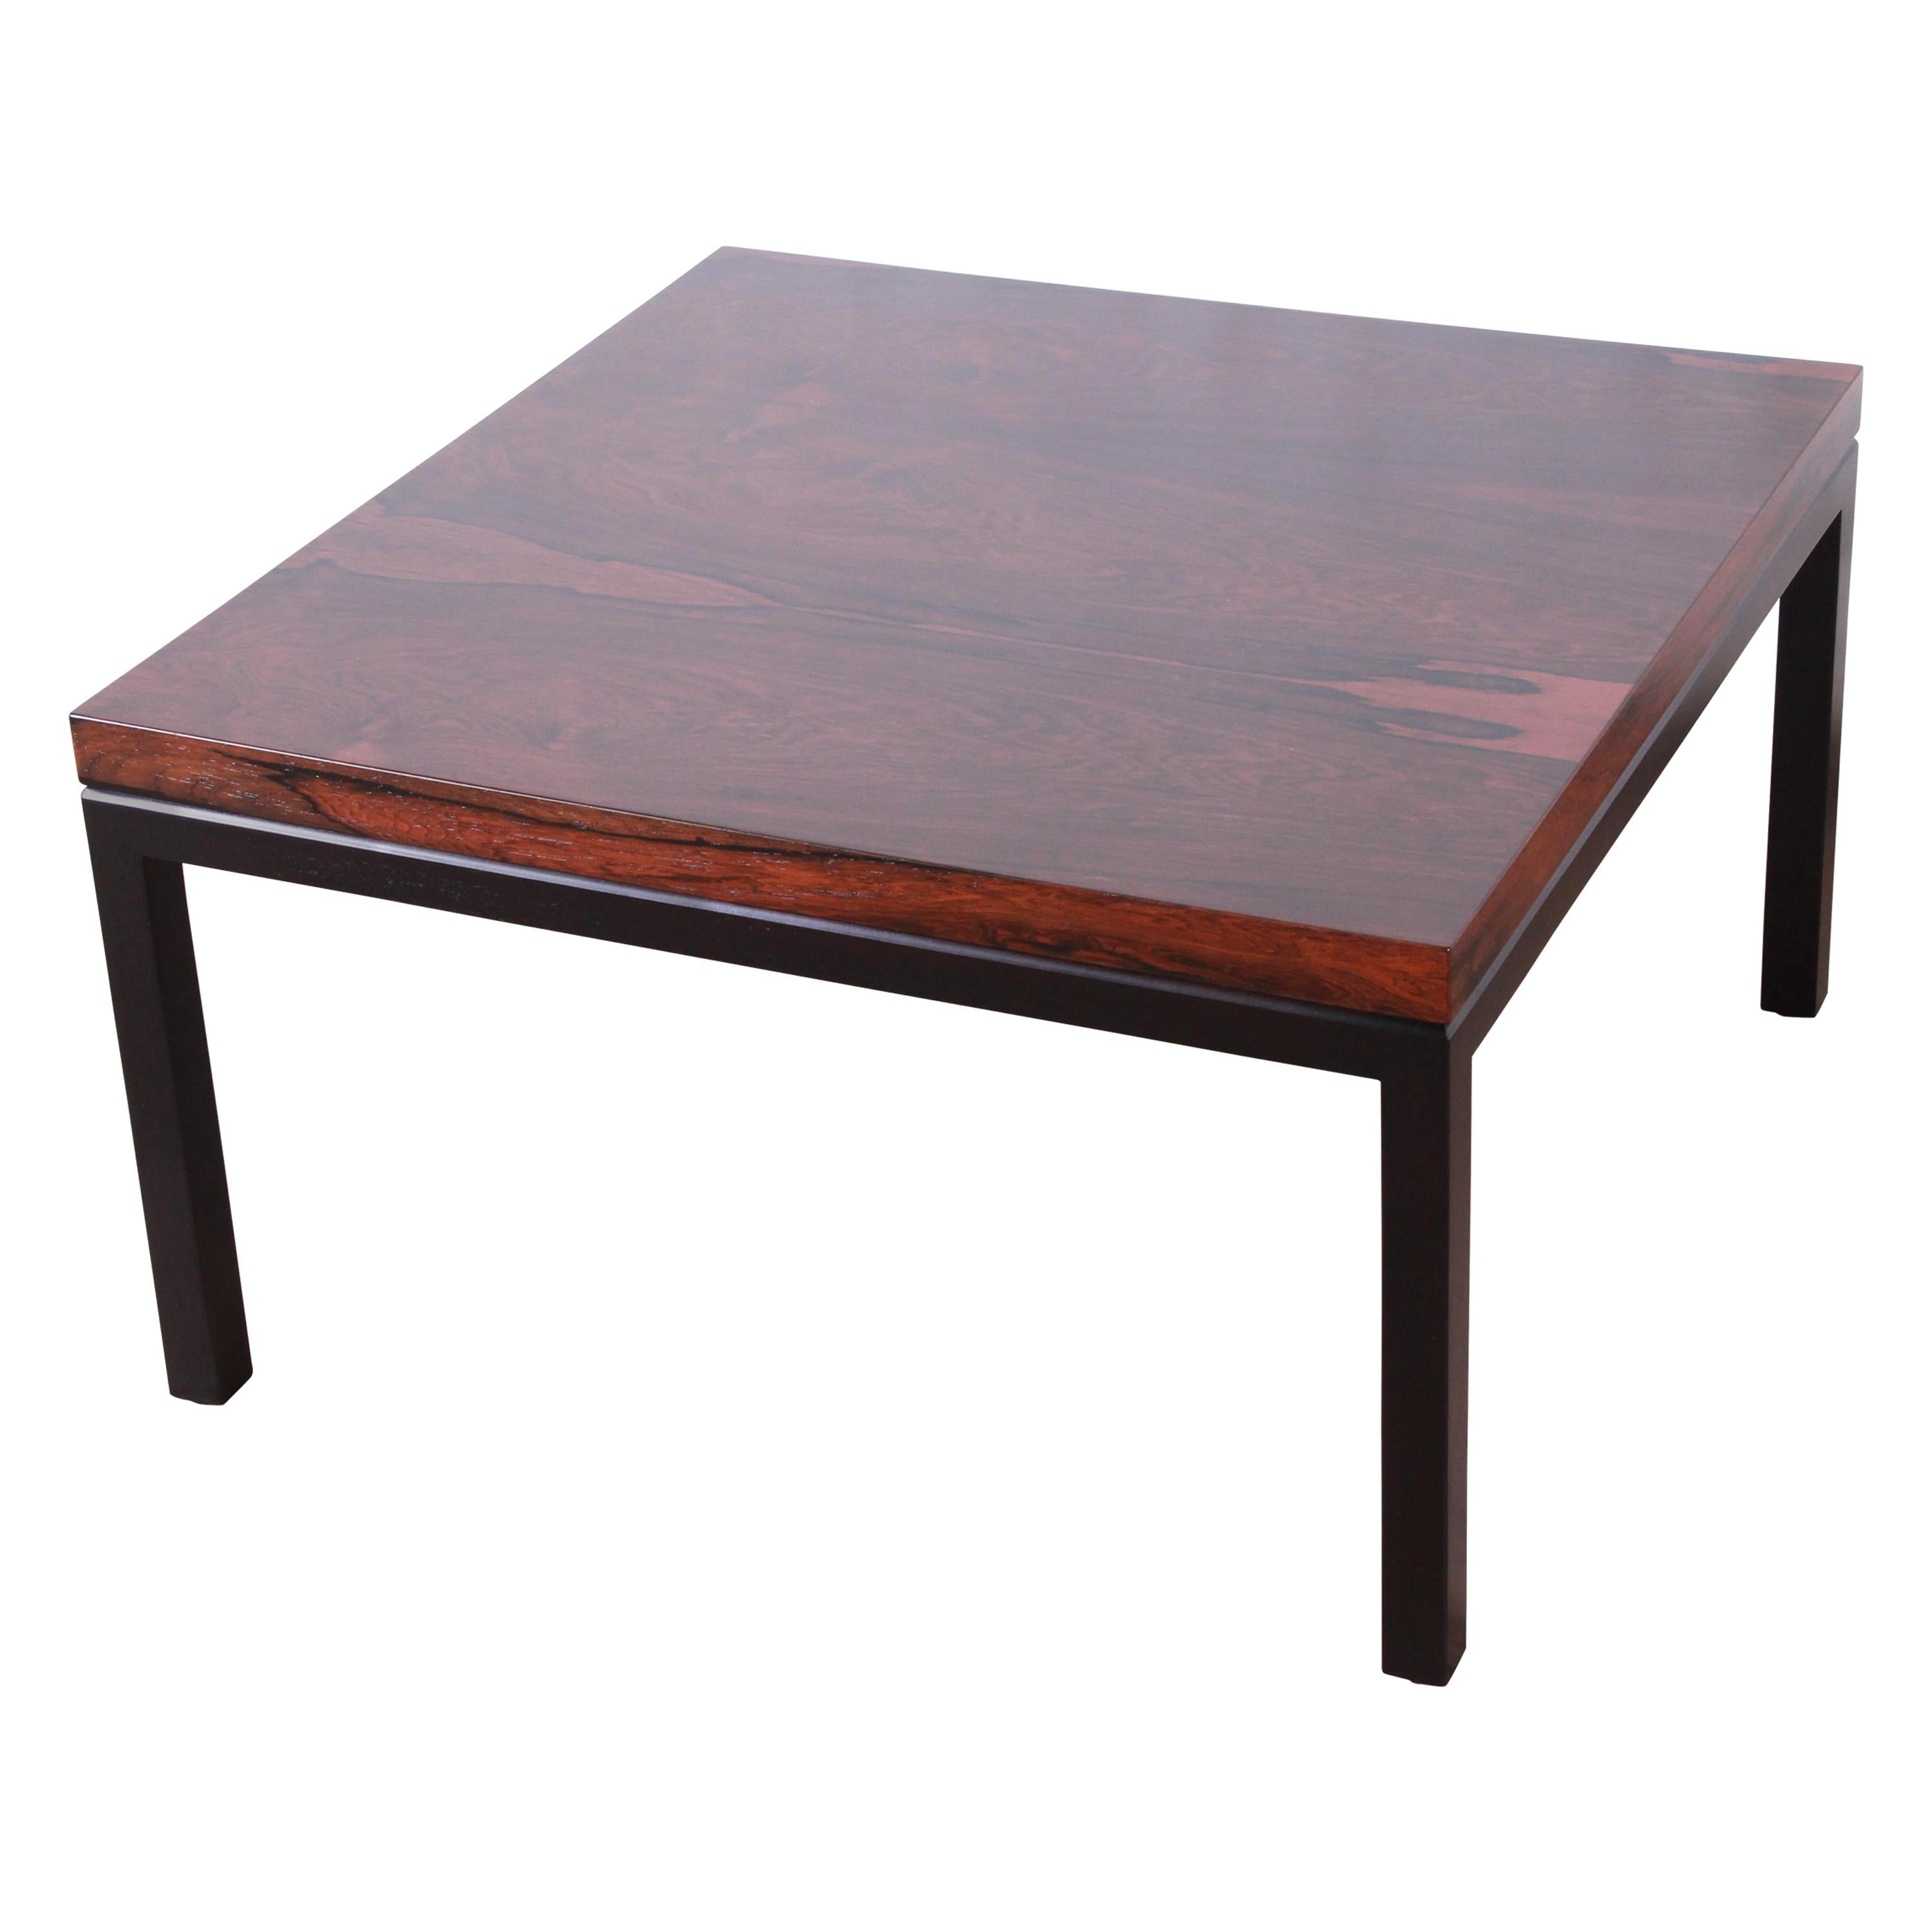 Milo Baughman for Thayer Coggin Rosewood Coffee Table, Newly Restored